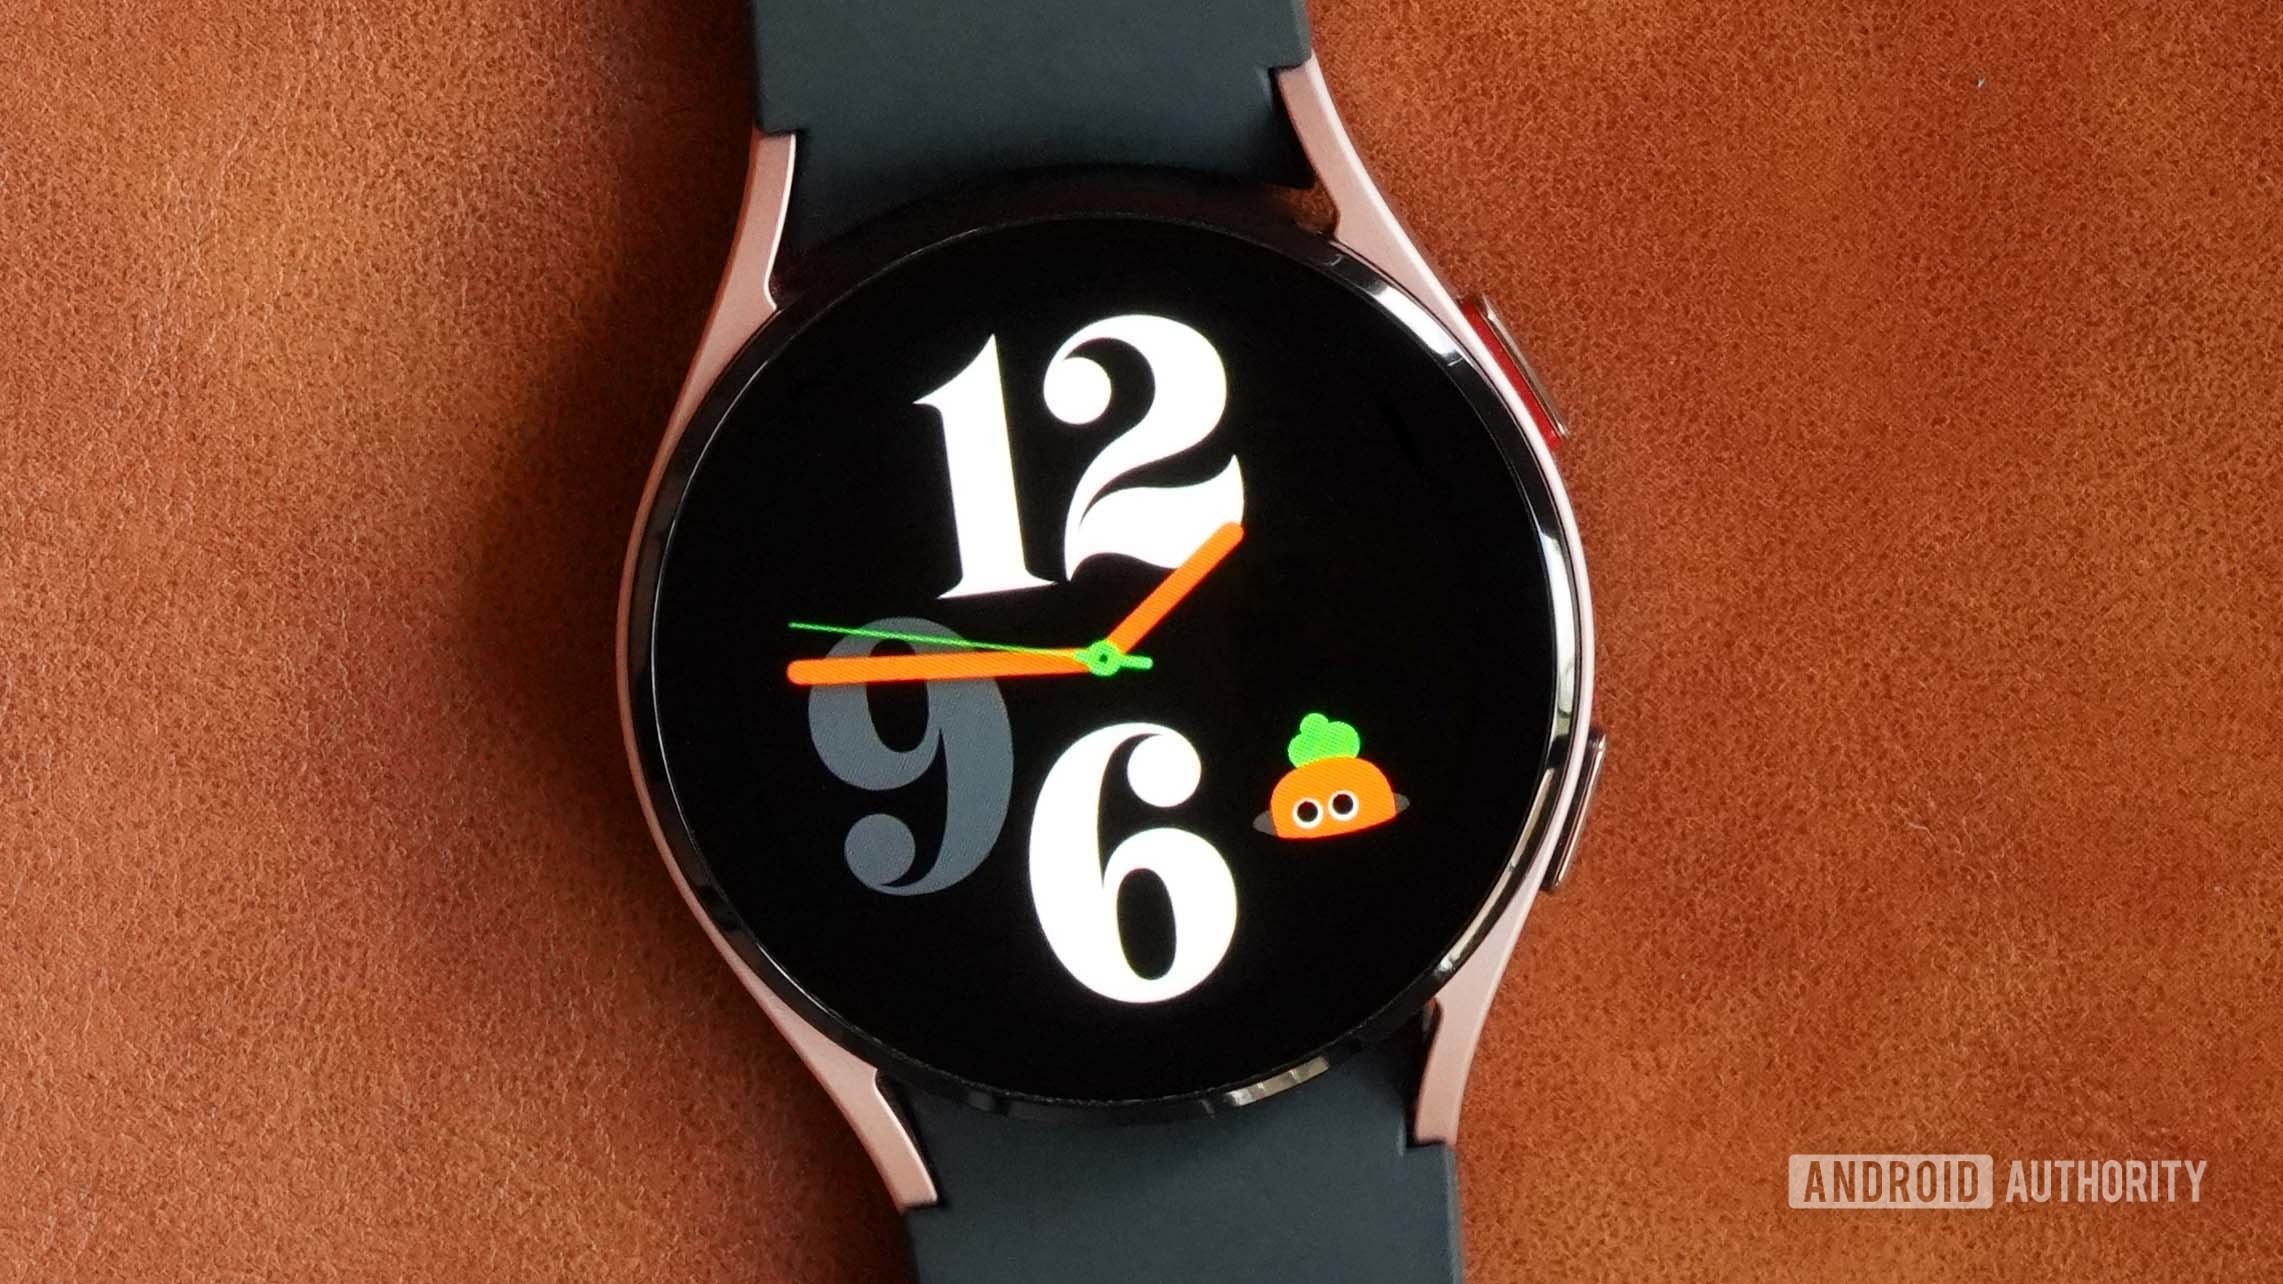 A Samsung Galaxy Watch 4 on a leather surface displays the watch face Cute Character.